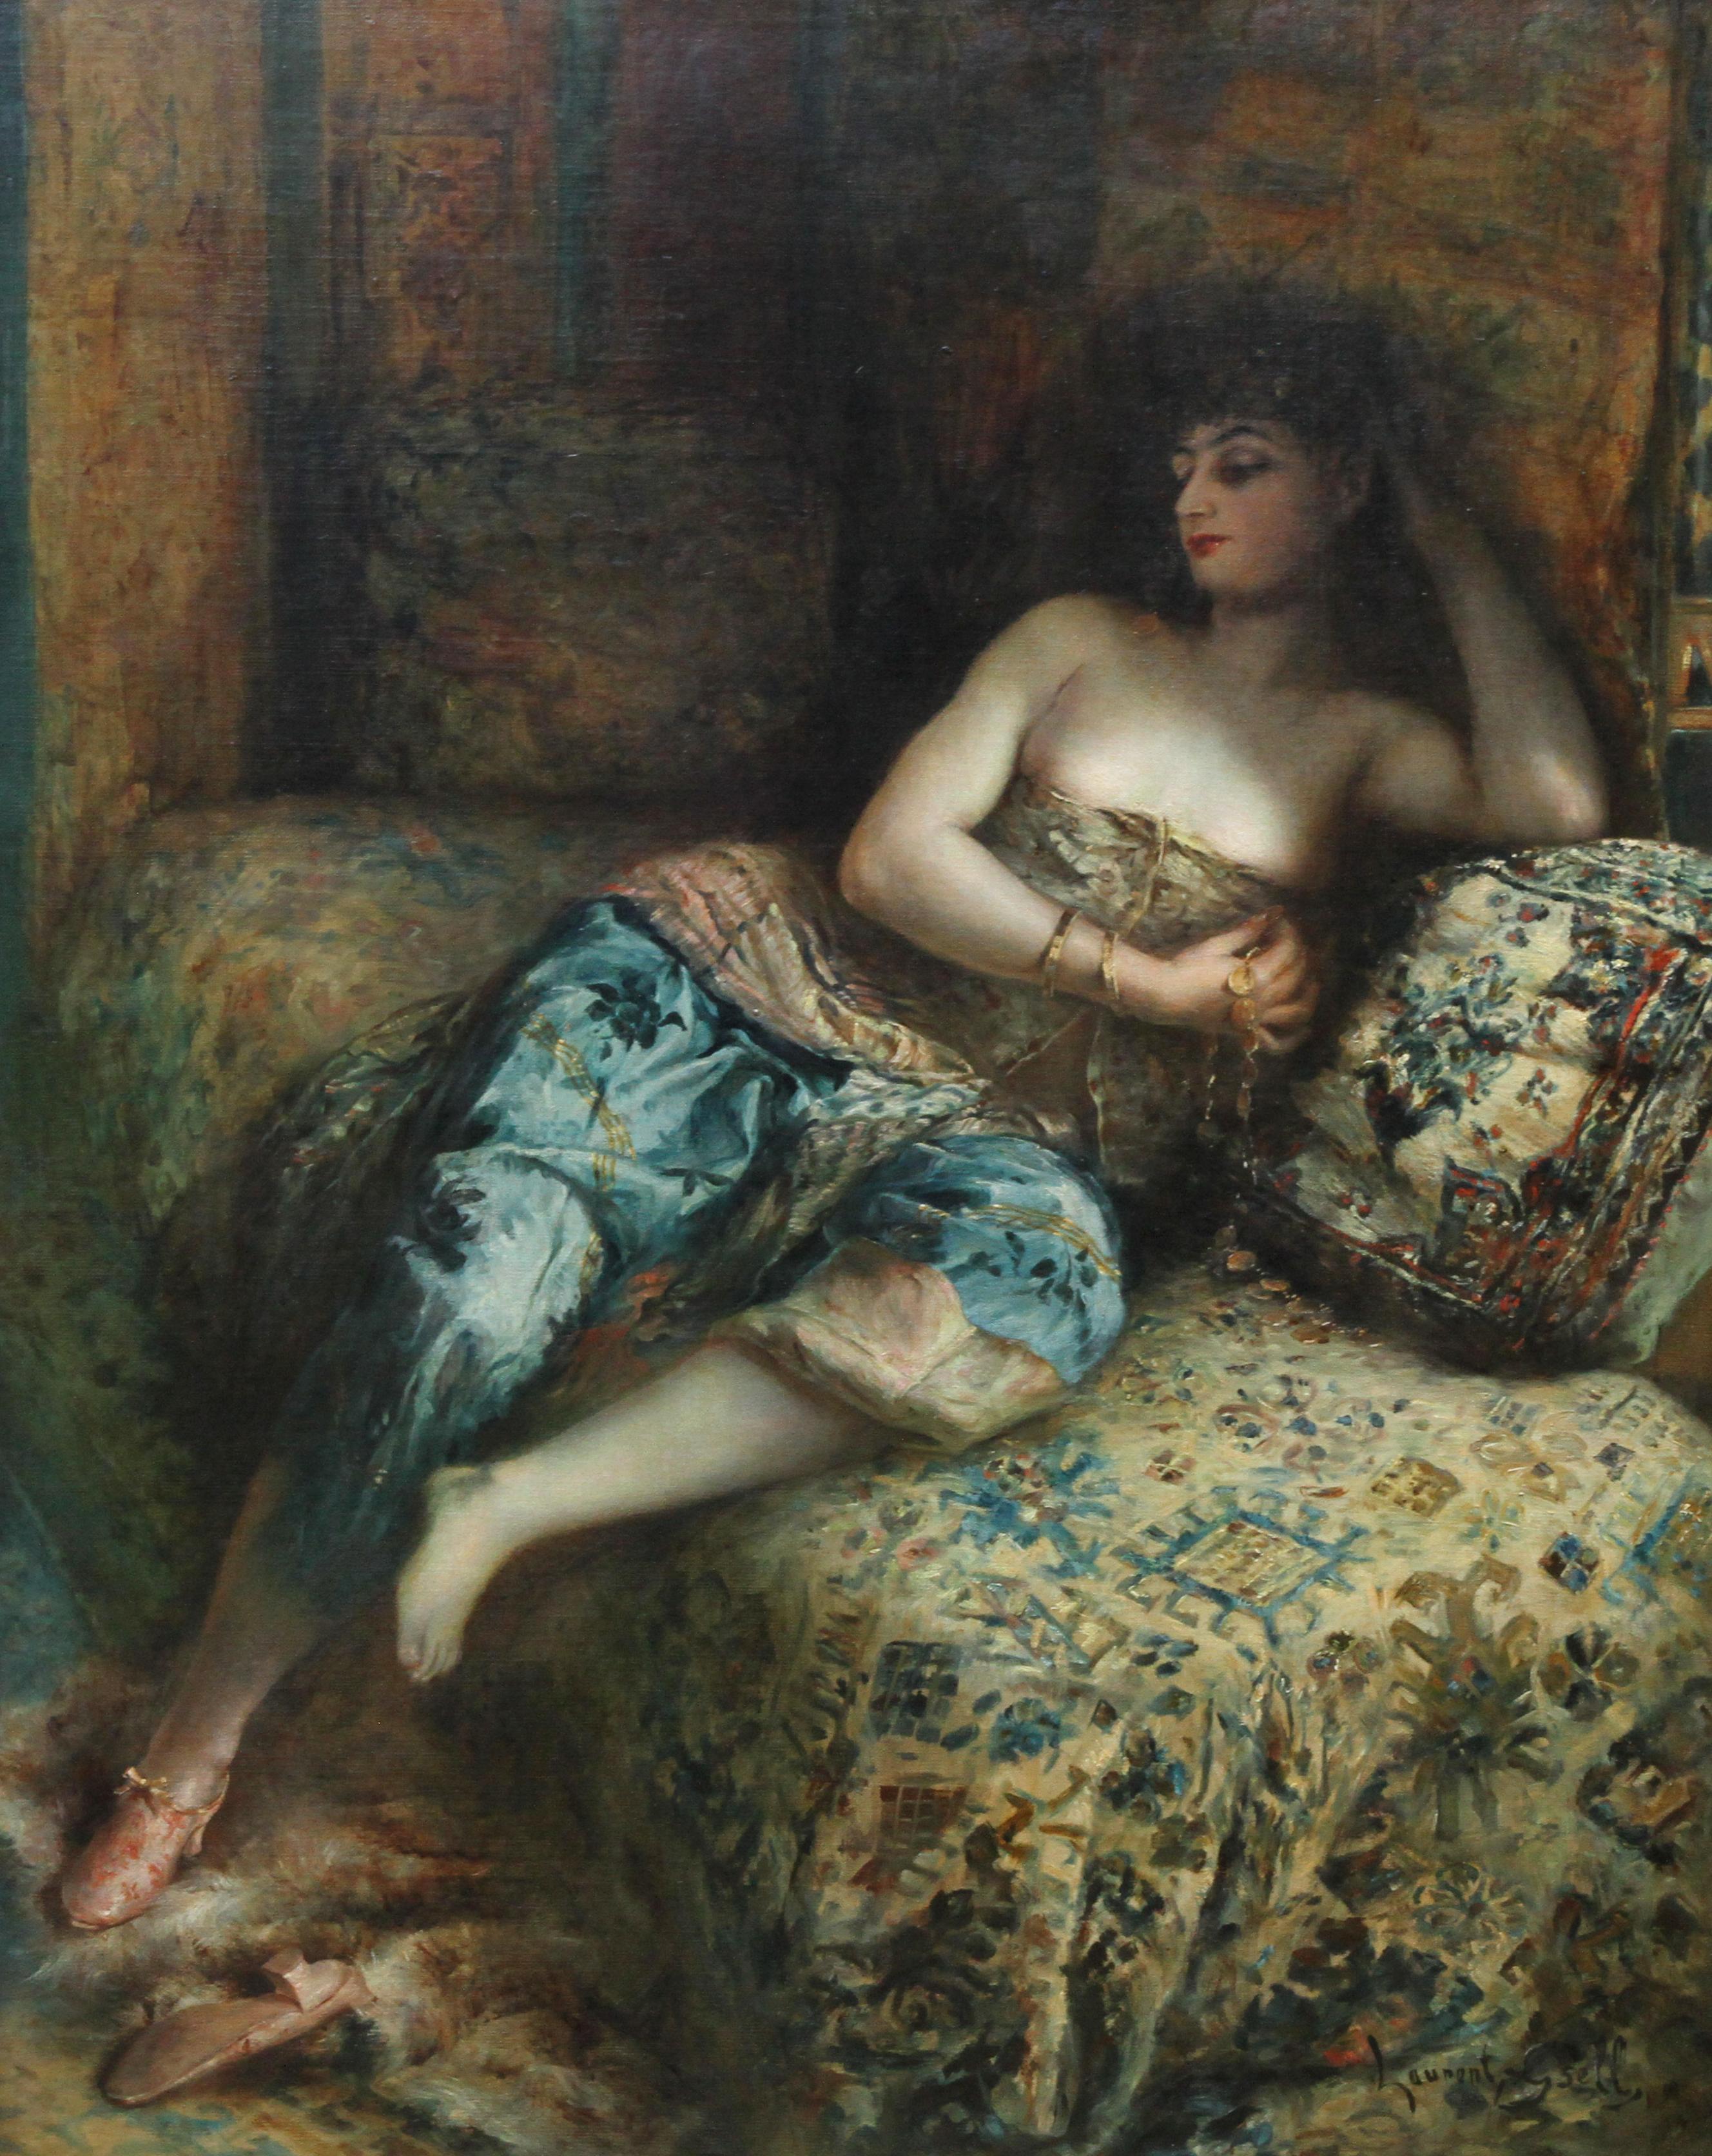 Odalisque - Woman in a Harem - French 1900 Orientalist art portrait oil painting For Sale 10